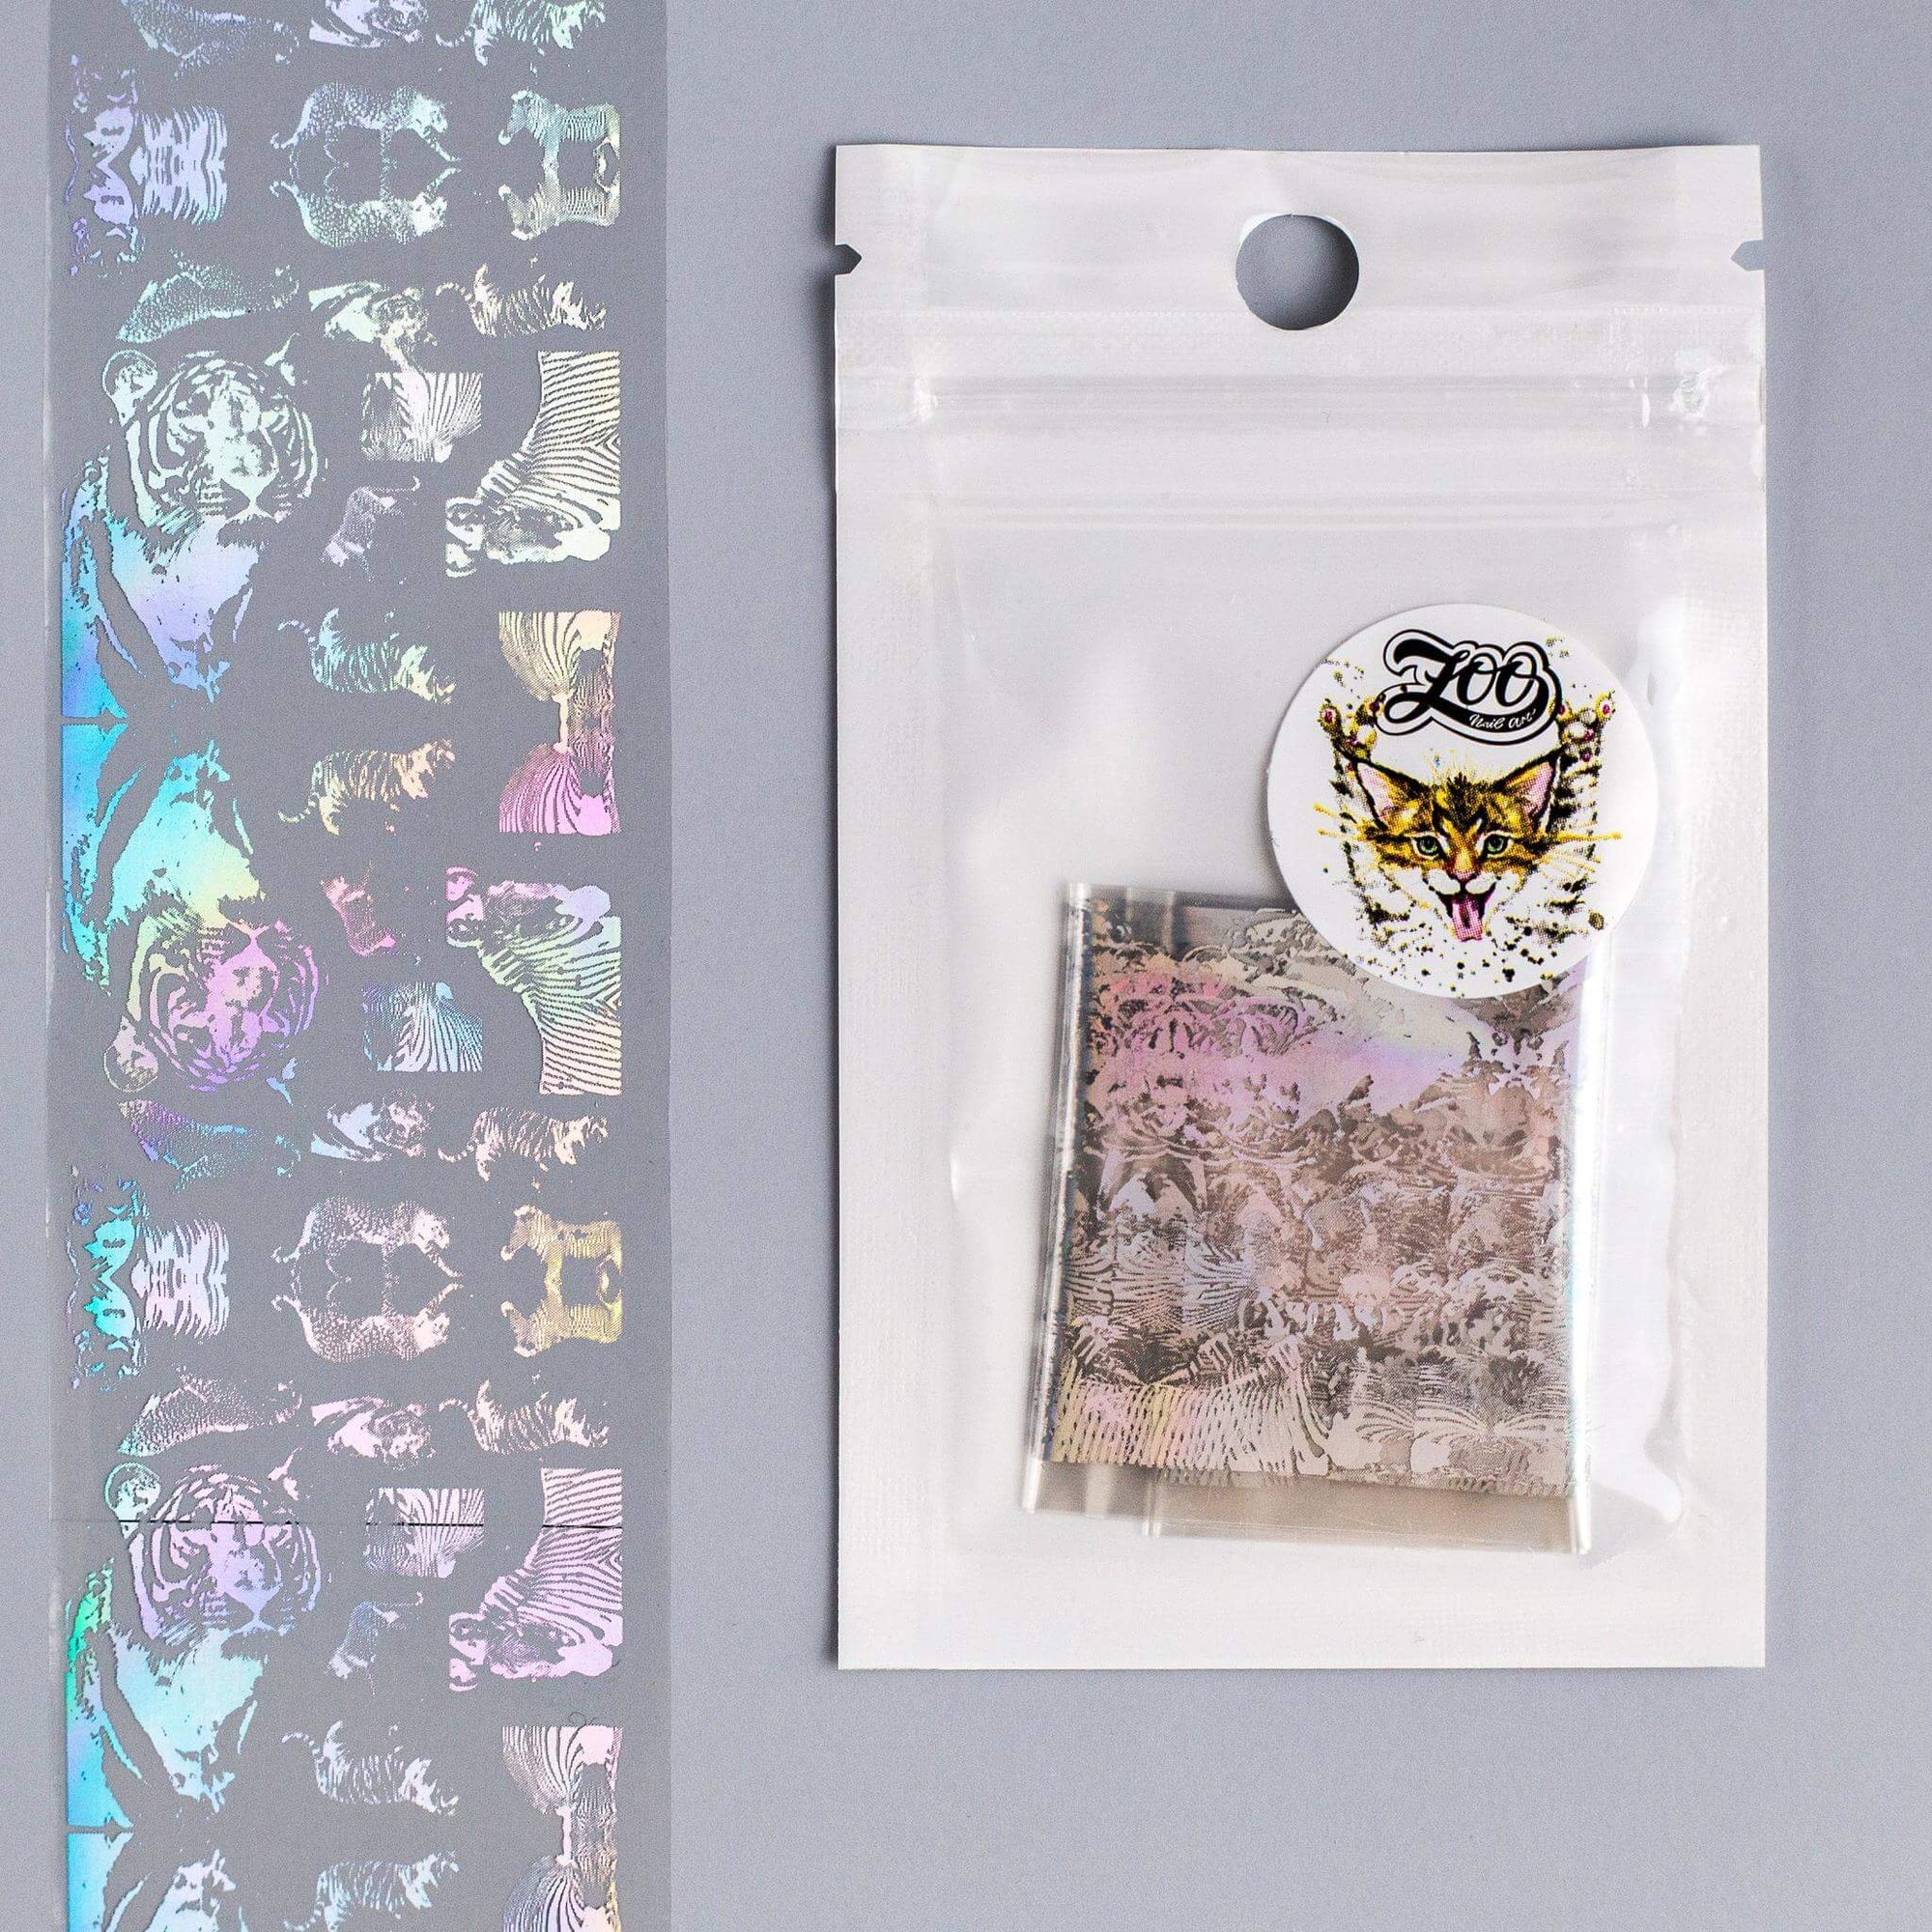 Zoo Nail Art Transfer Foil - Chrome Holography Animals